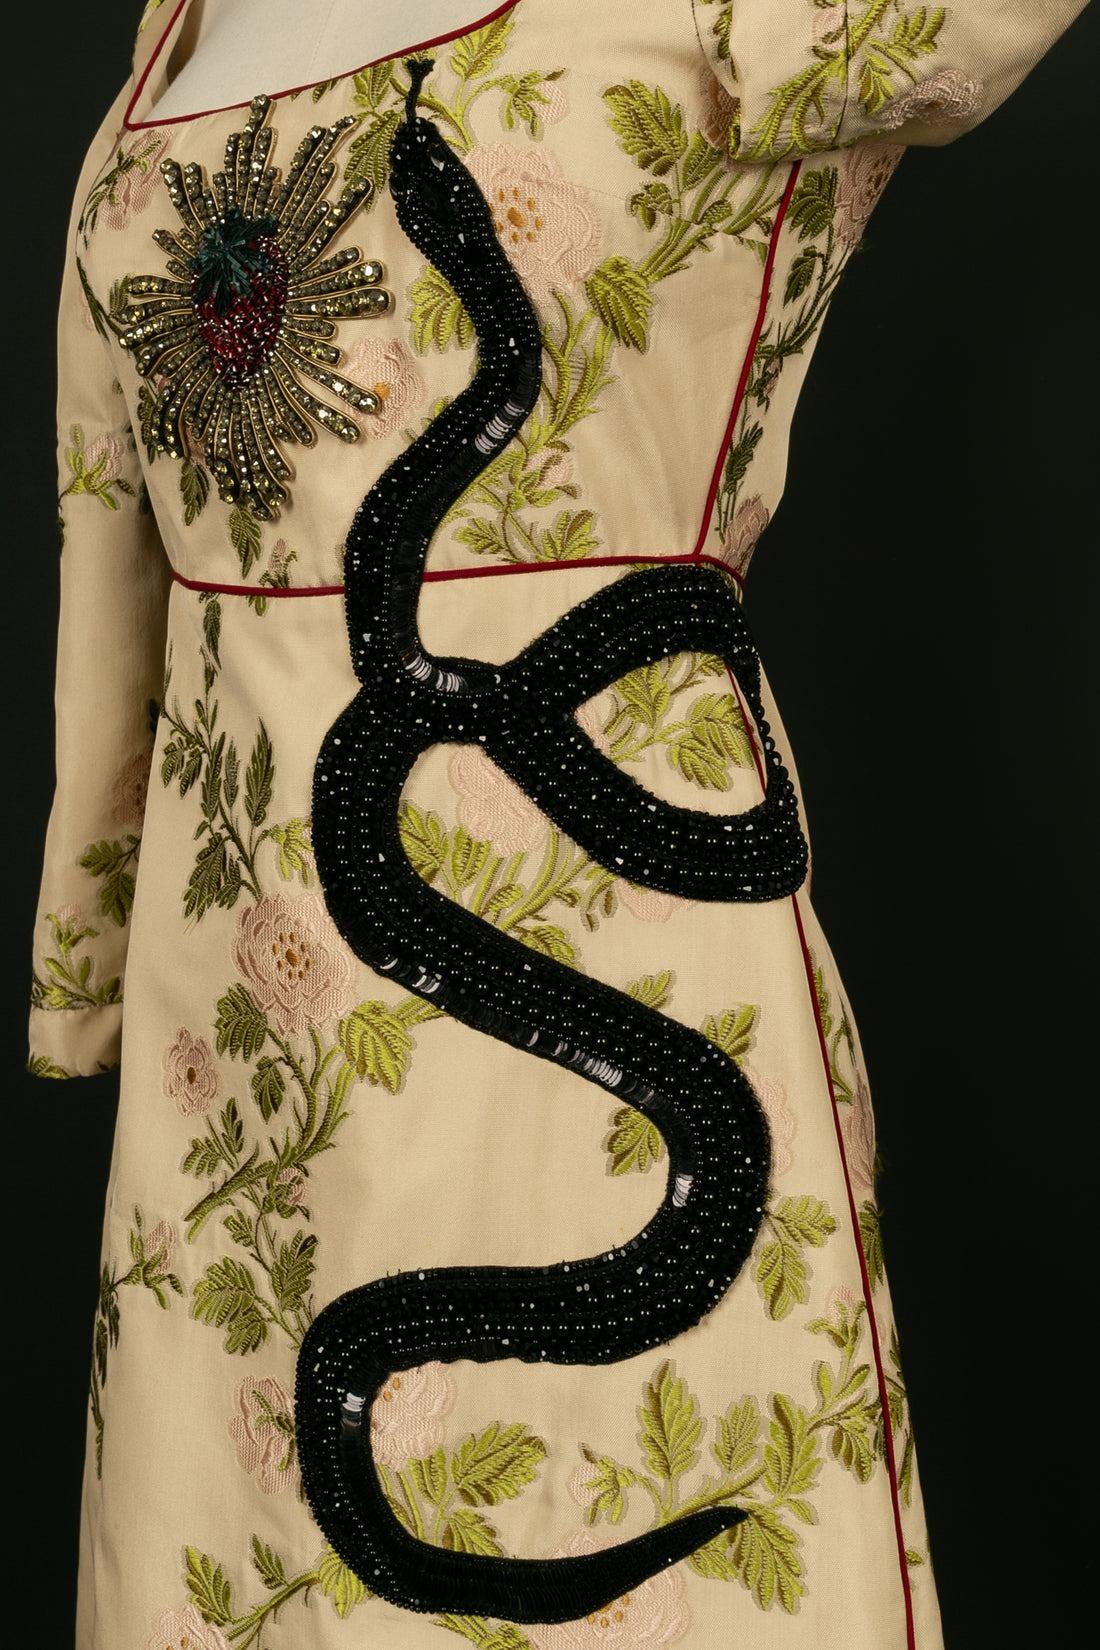 Gucci Mid-Length Dress Pre-Fall with Floral Patterns, 2016 For Sale 2